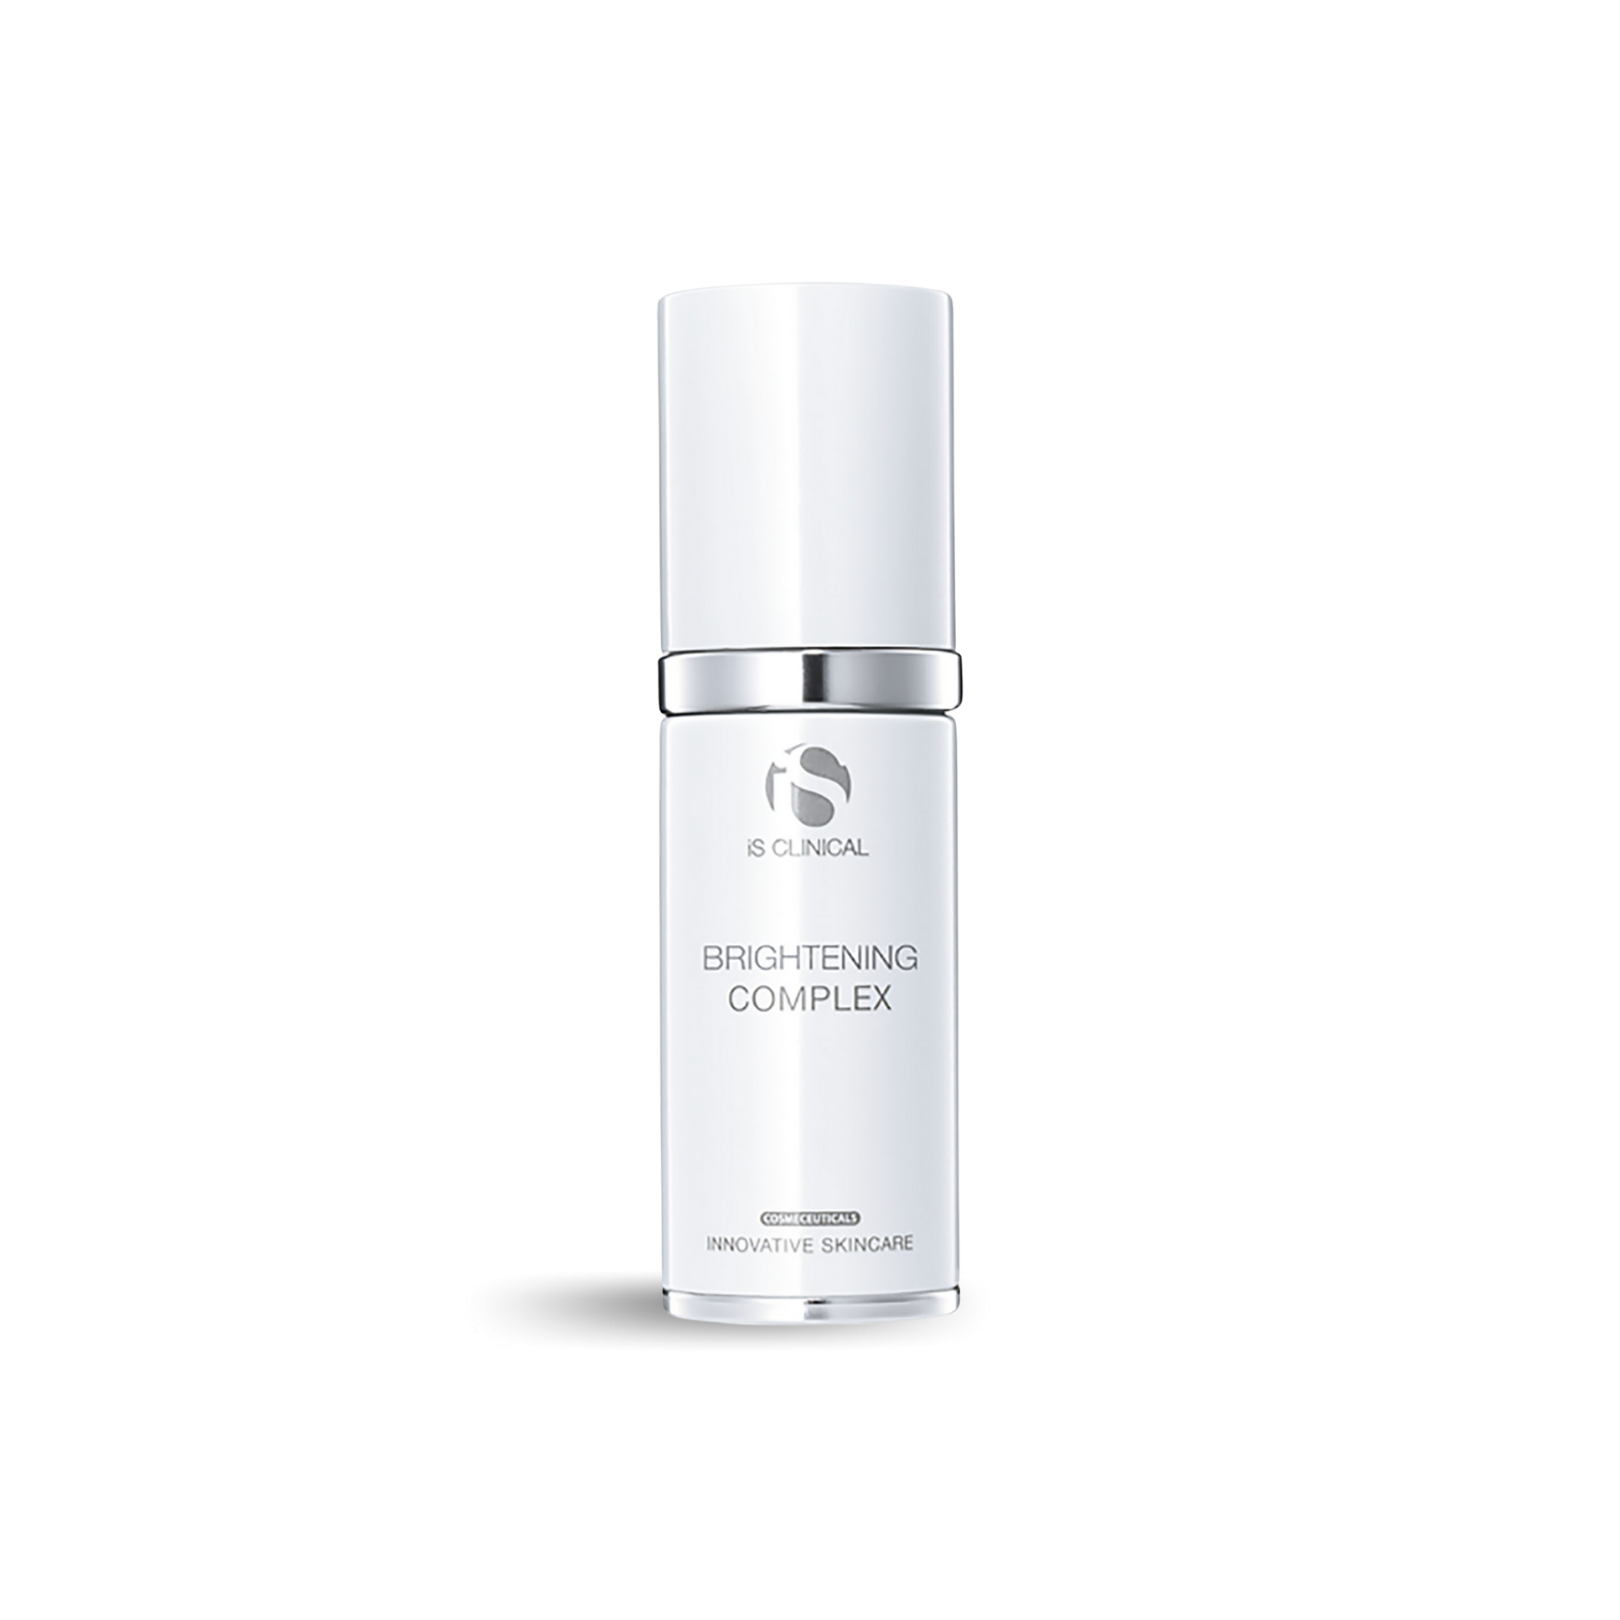 Brightening Complex isclinical